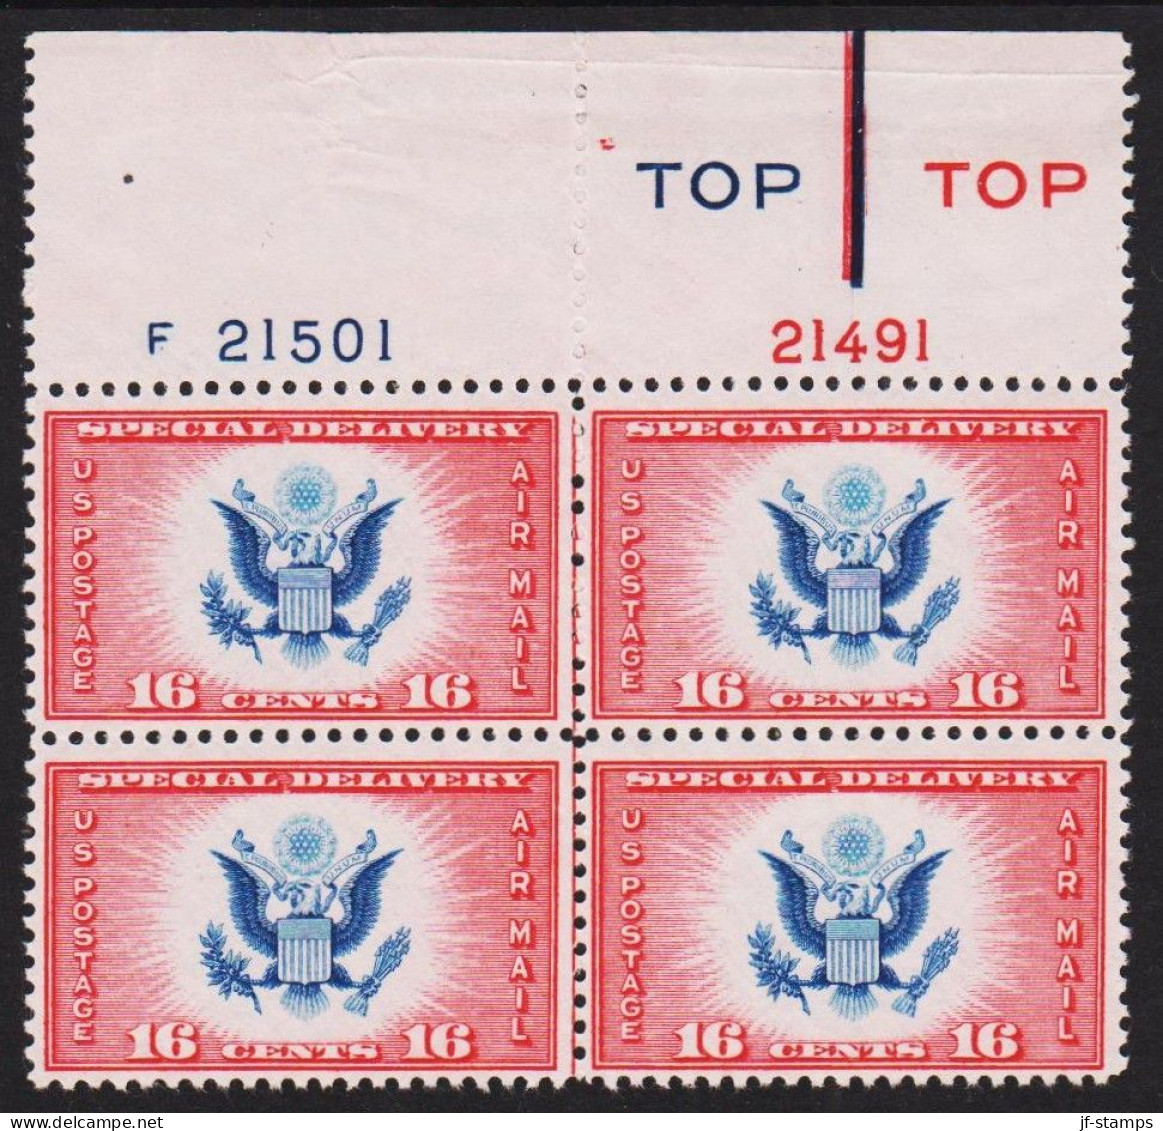 1936. USA. SPECIAL DELIVERY 16 CENTS 16. AIR MAIL, 4block Never Hinged.  Platenumber 21501 And 21491.  - JF542824 - Nuevos